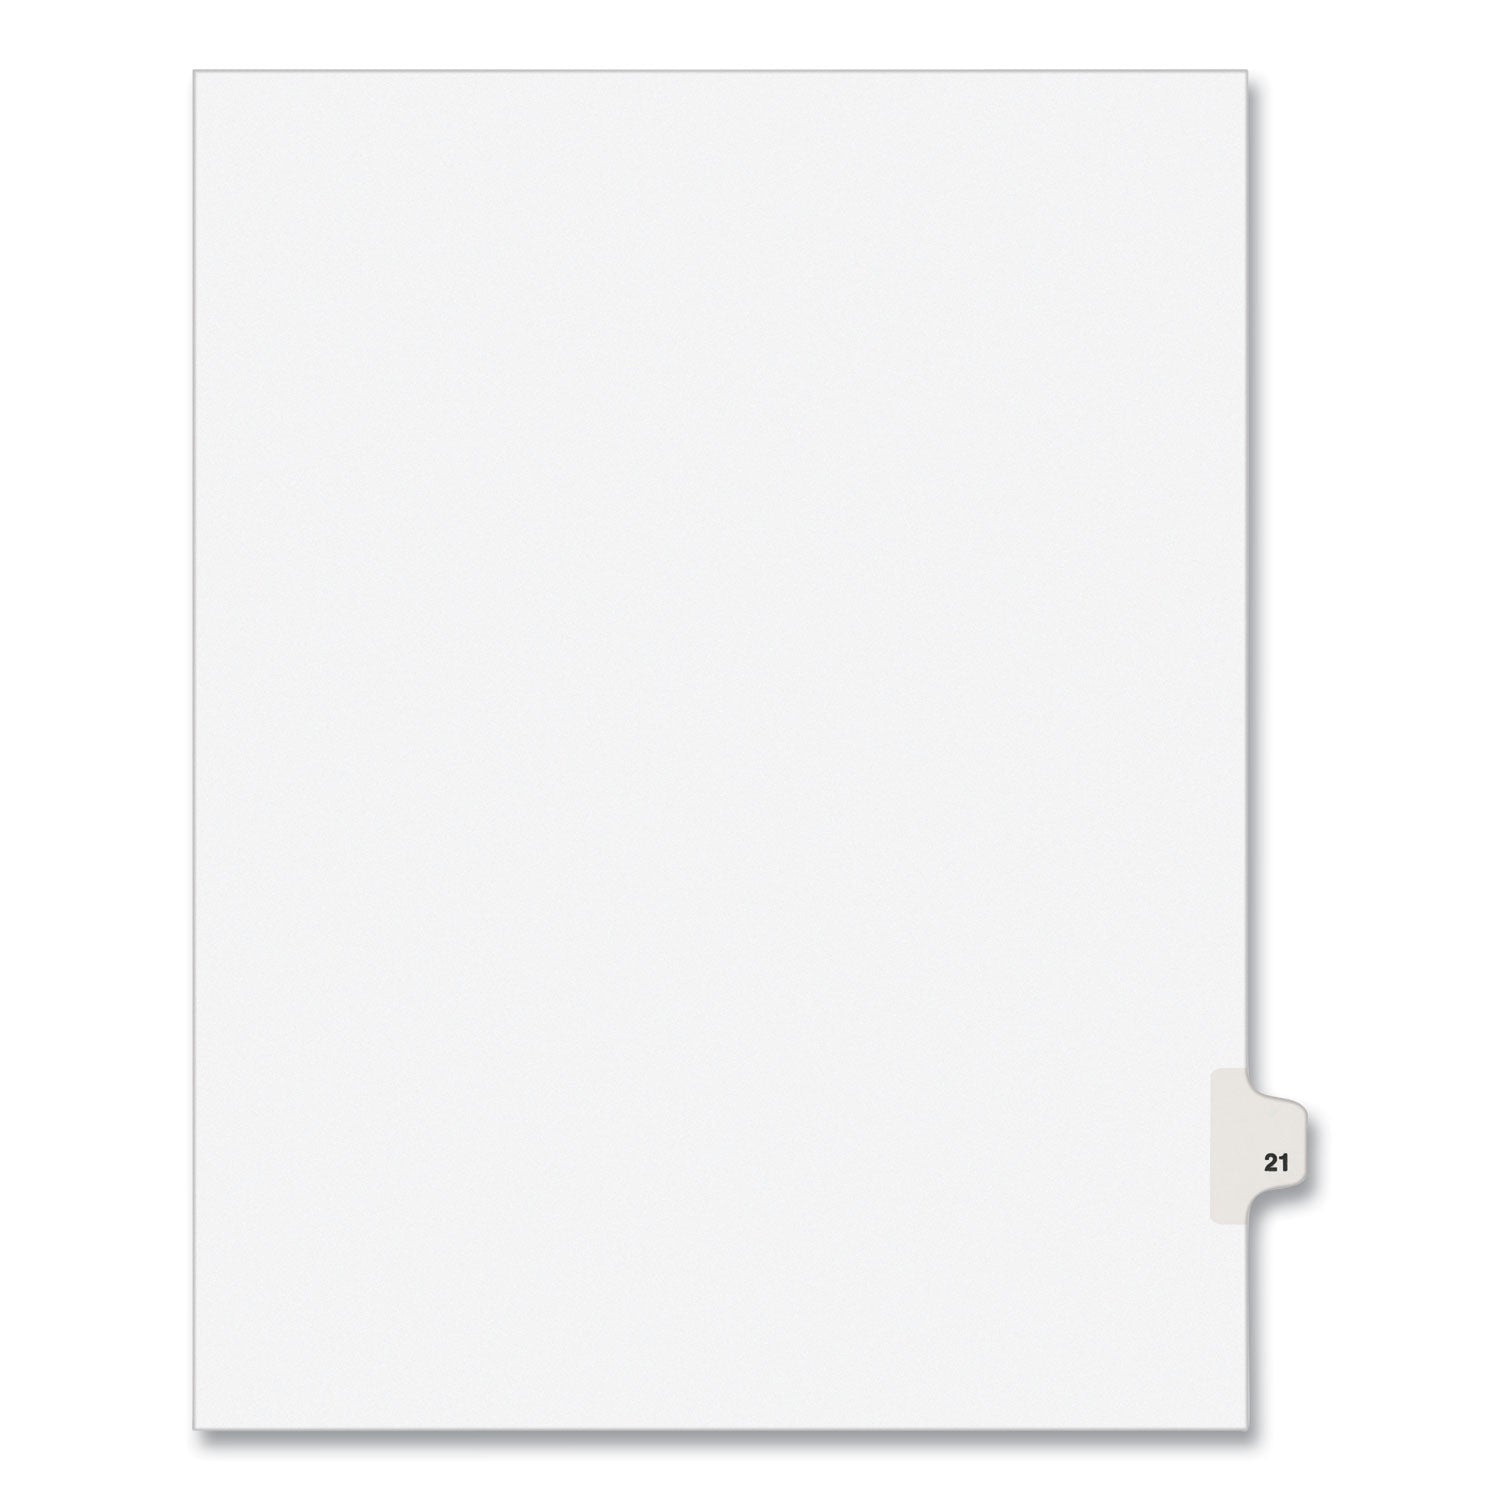 Preprinted Legal Exhibit Side Tab Index Dividers, Avery Style, 10-Tab, 21, 11 x 8.5, White, 25/Pack, (1021) - 